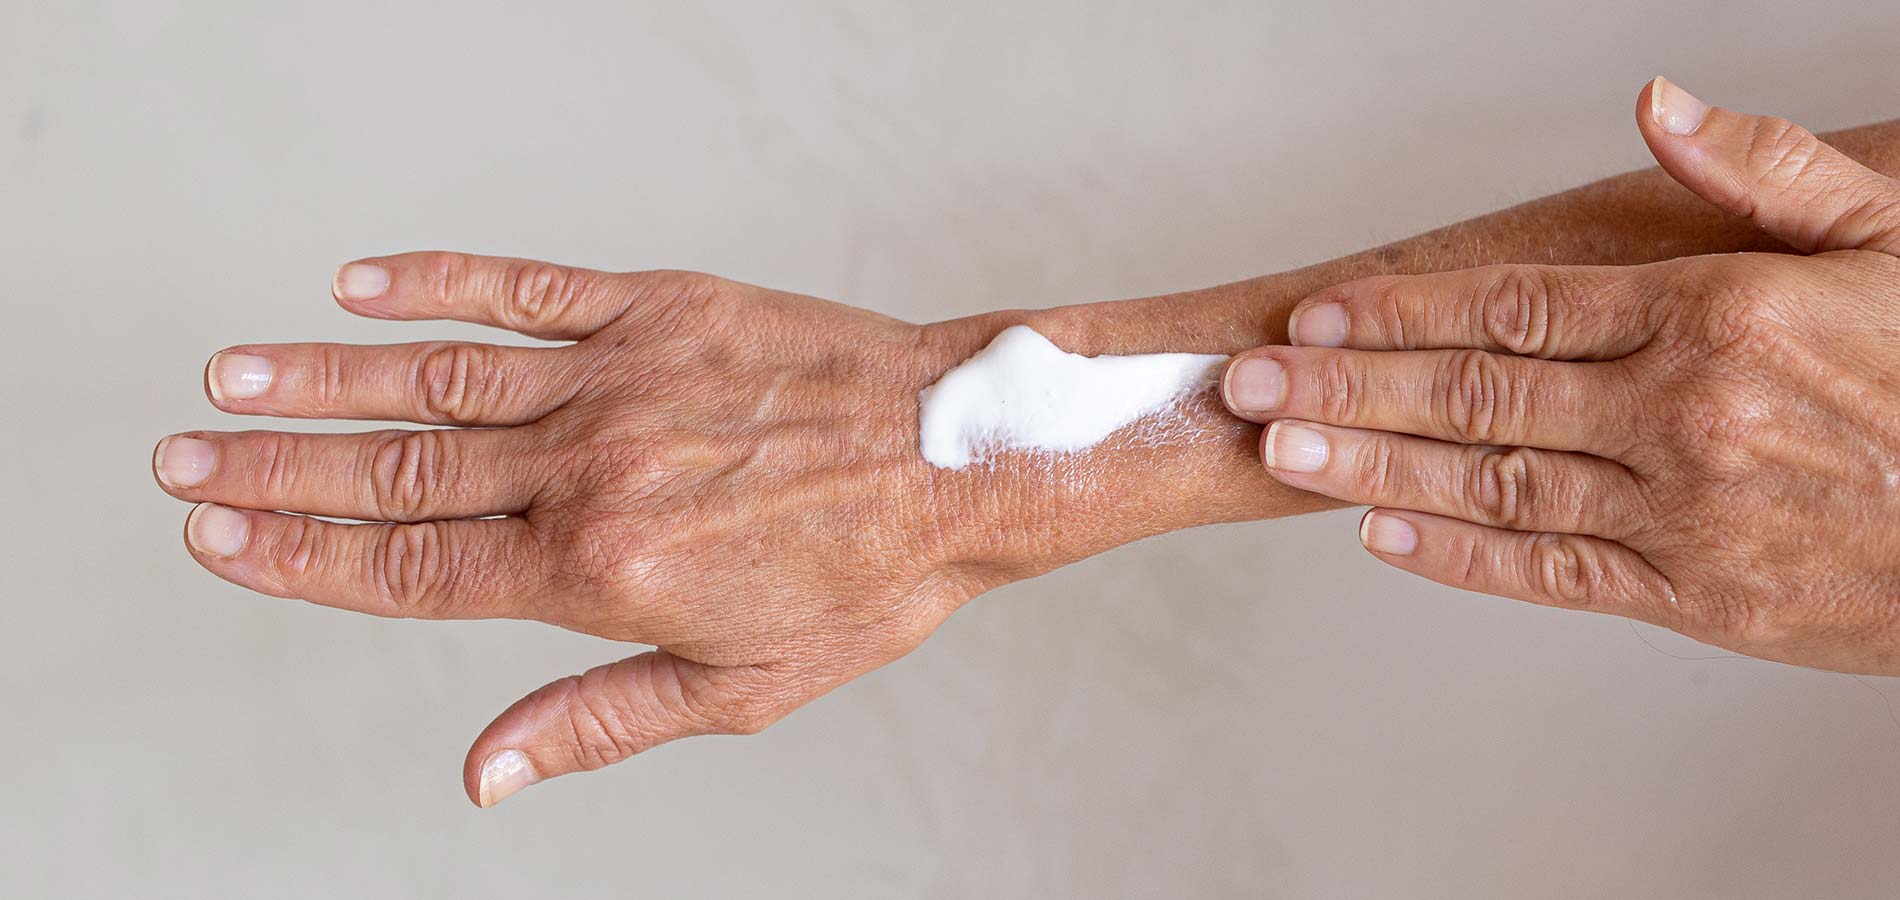 5 Good Reasons to Take Care of Your Hands in the Winter